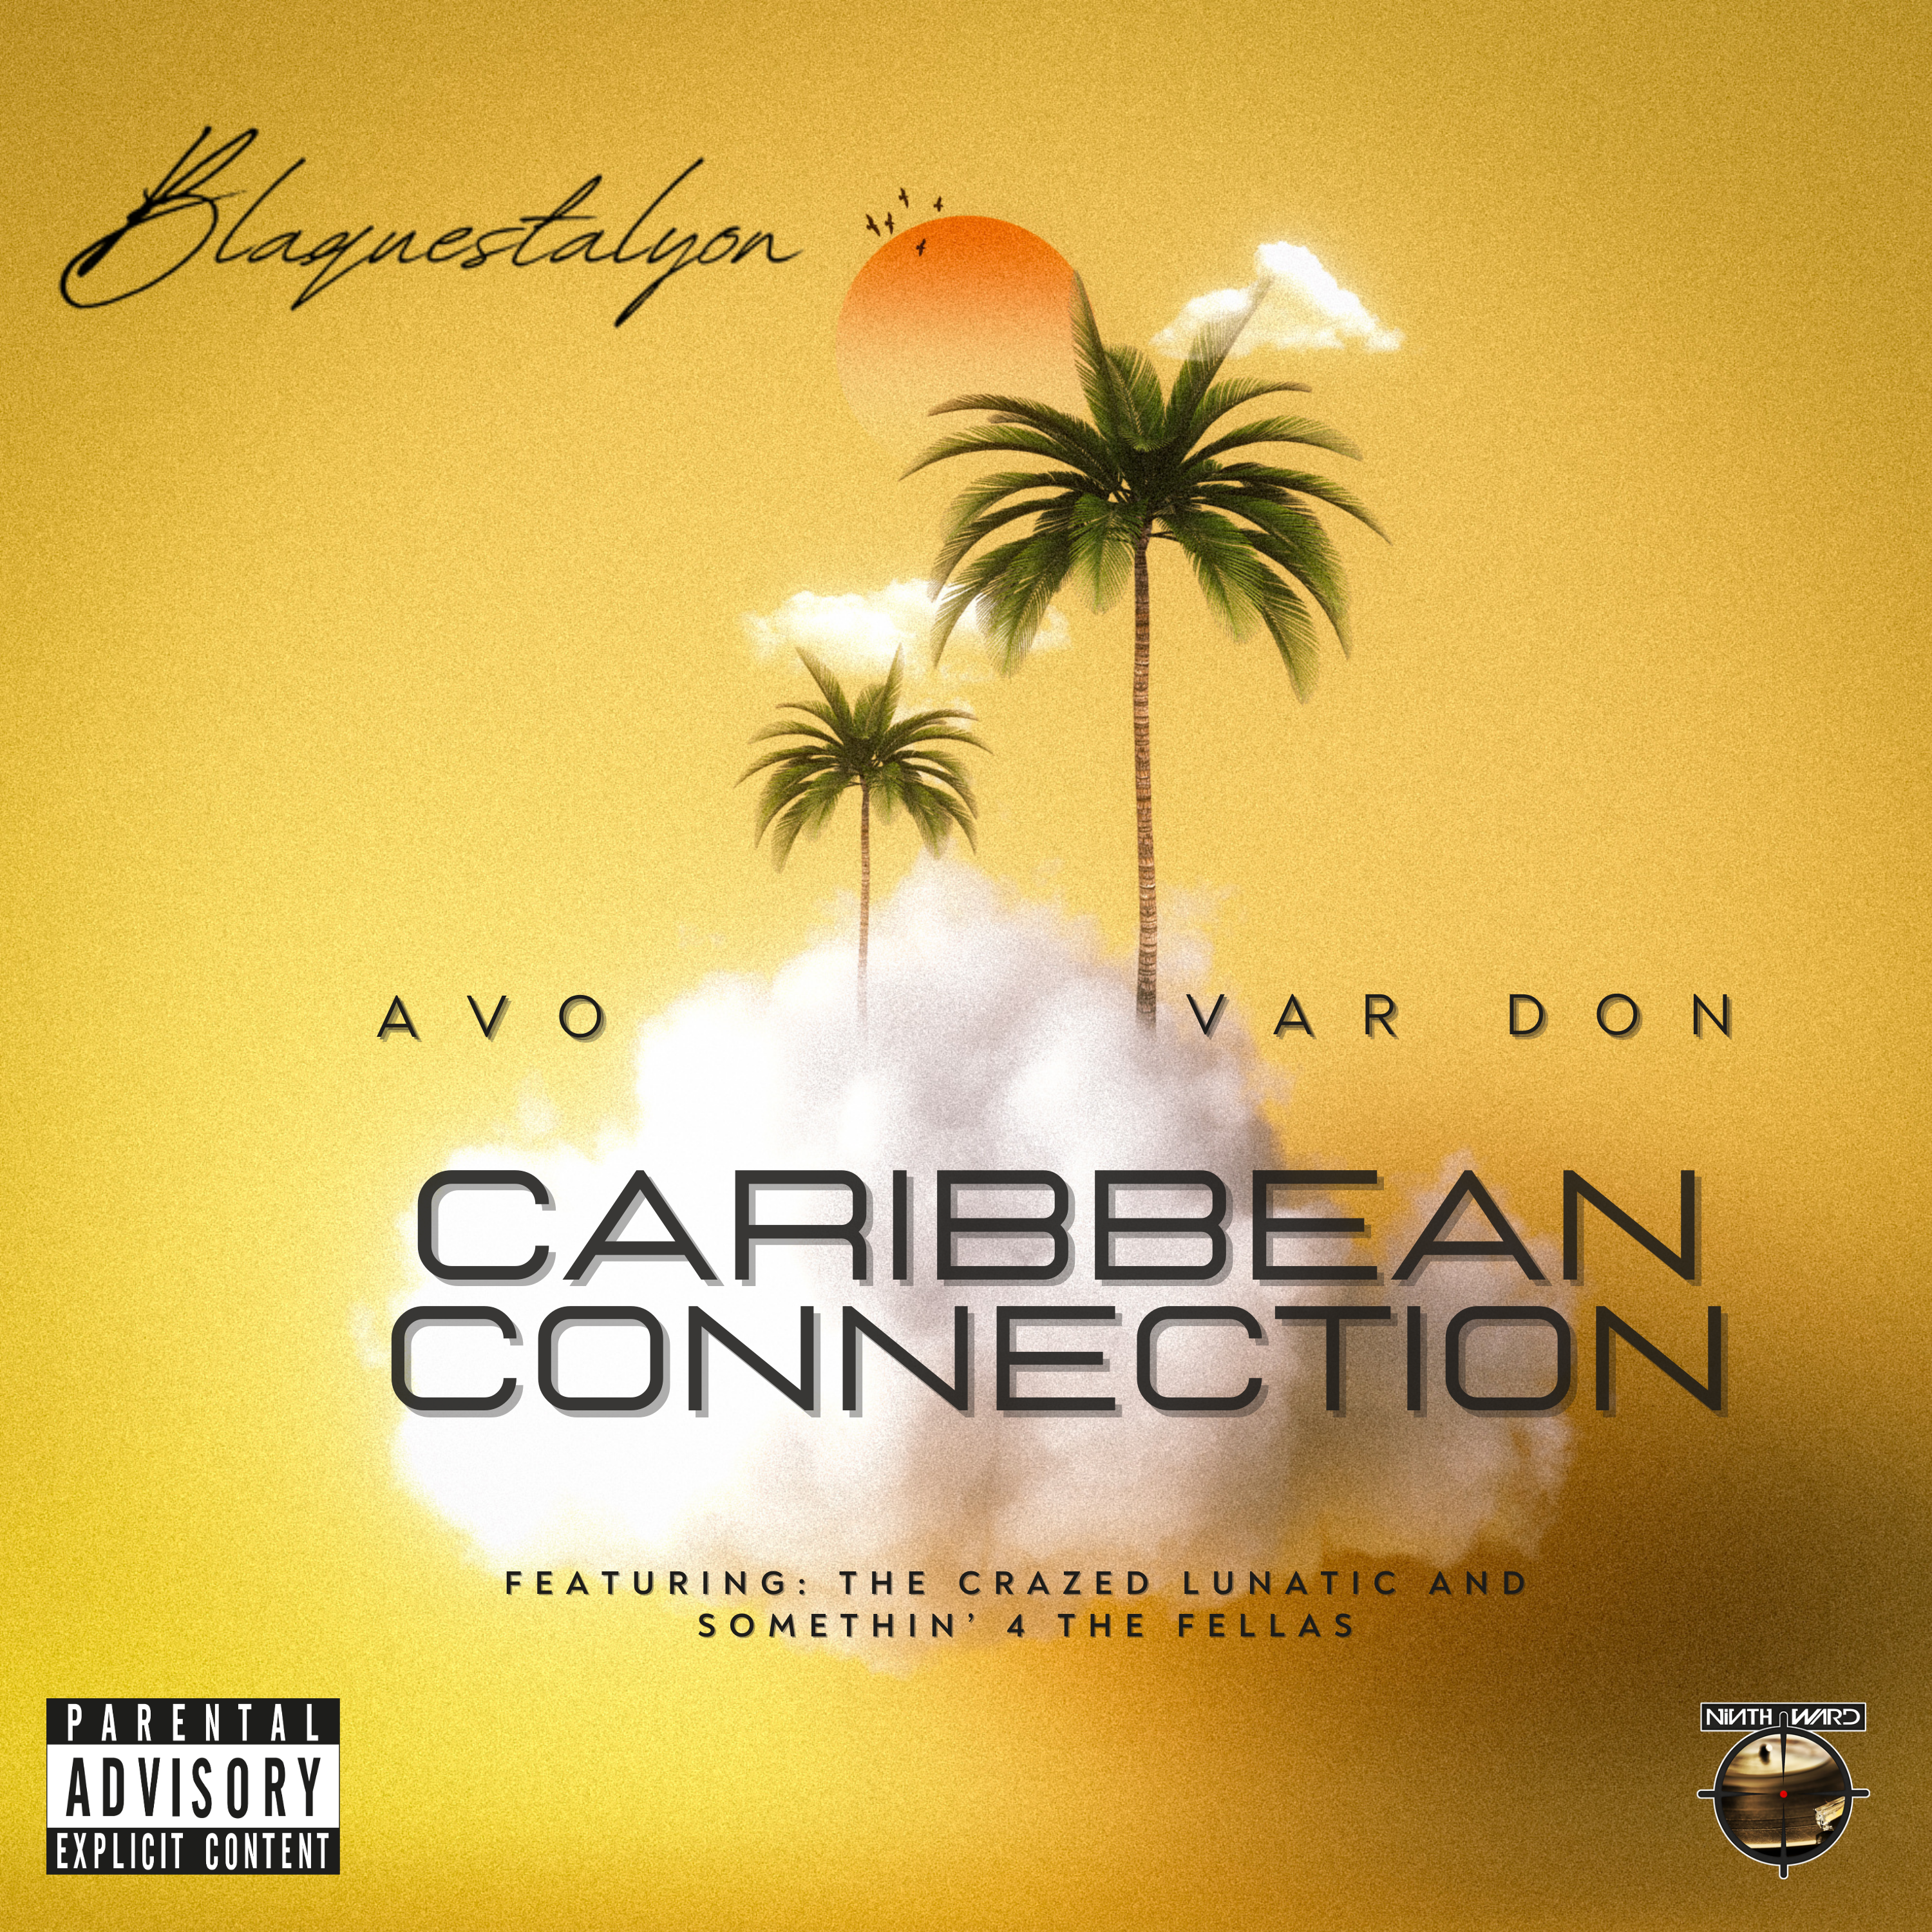 Art for Caribbean Connection by Blaquestalyon X AVO X Var Don FT The Crazed Lunatic & Somethin' 4 the Fellas